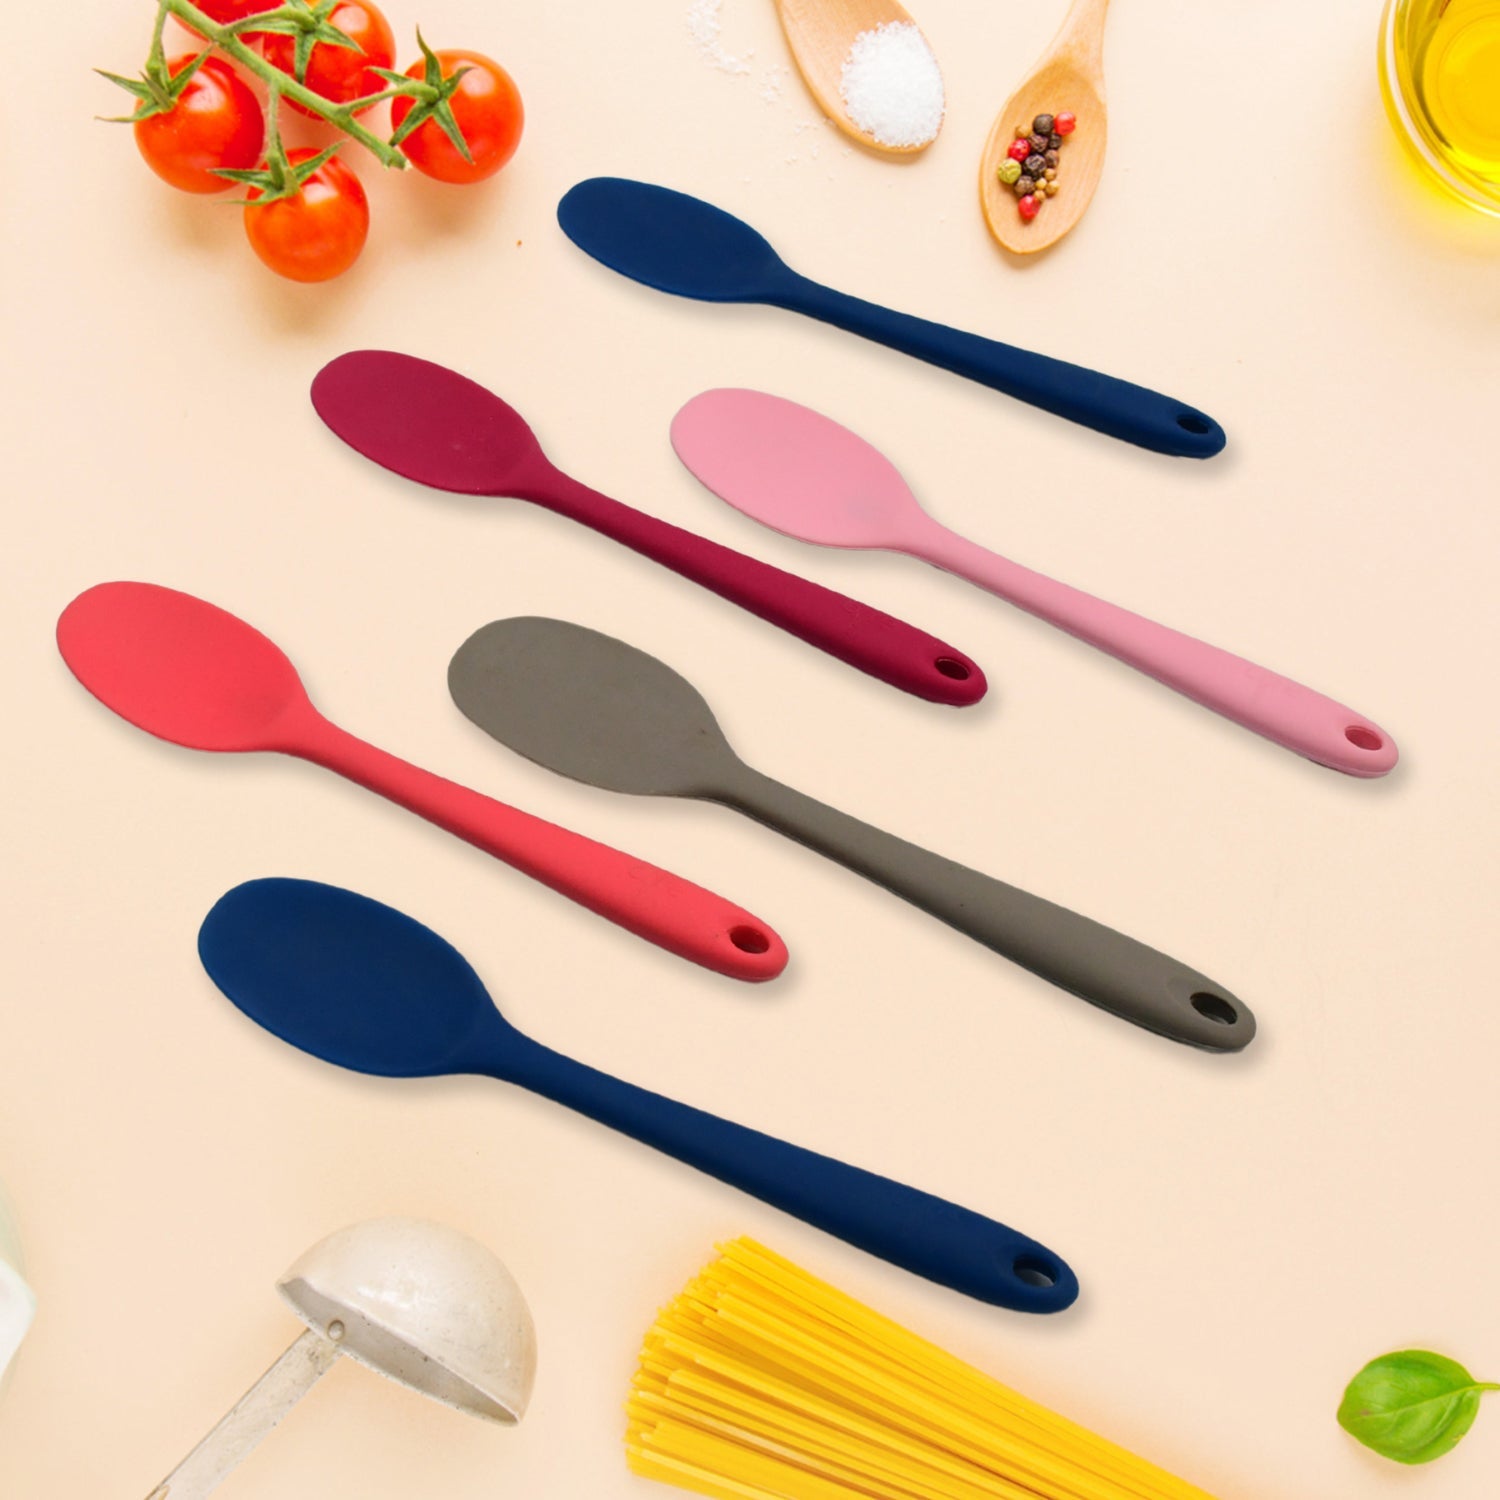 Multipurpose Silicone Spoon, Silicone Basting Spoon Non-Stick Kitchen Utensils Household Gadgets Heat-Resistant Non Stick Spoons Kitchen Cookware Items For Cooking and Baking (6 Pcs Set)